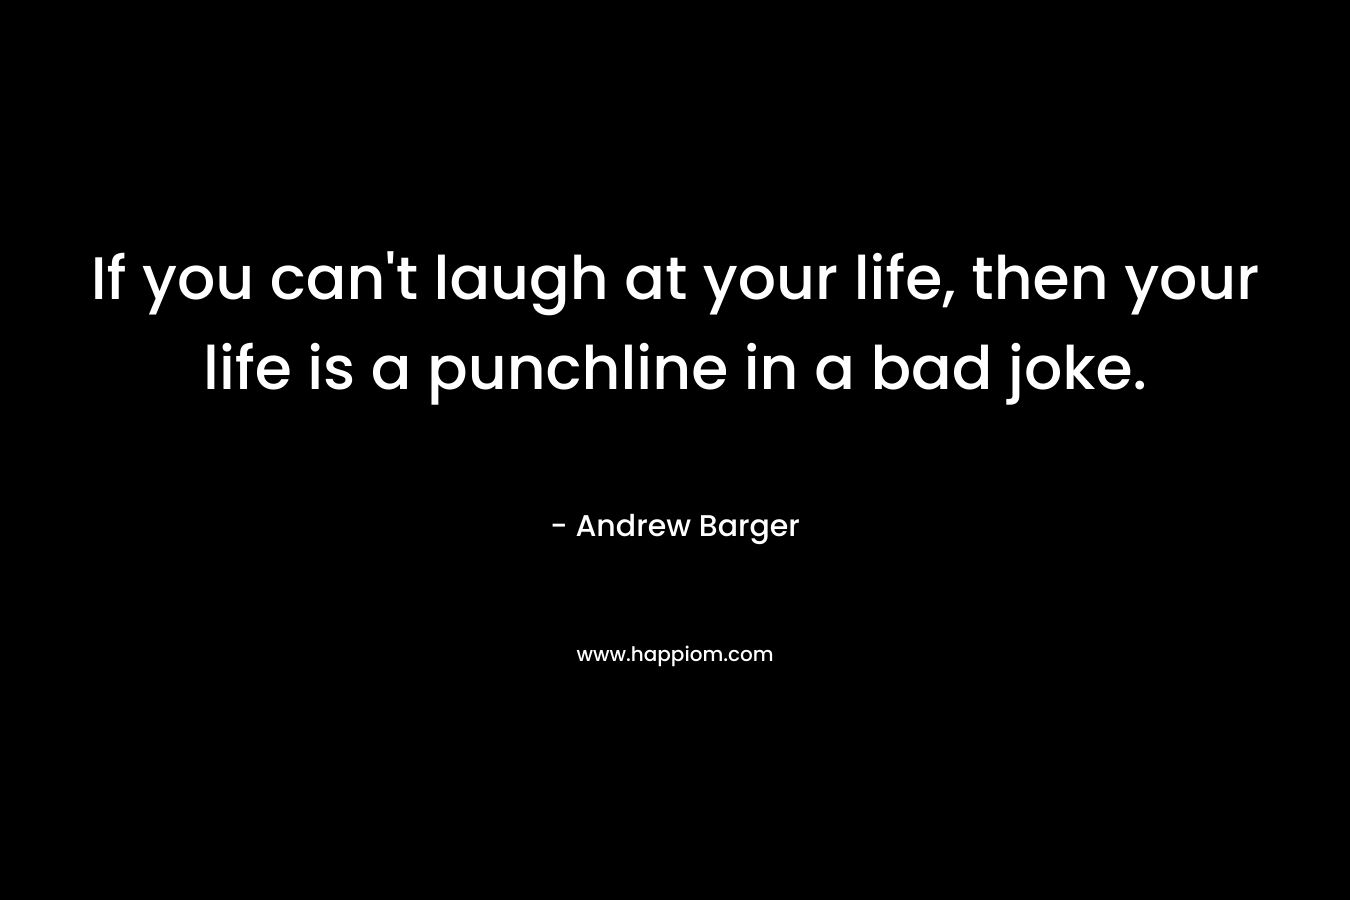 If you can’t laugh at your life, then your life is a punchline in a bad joke. – Andrew Barger